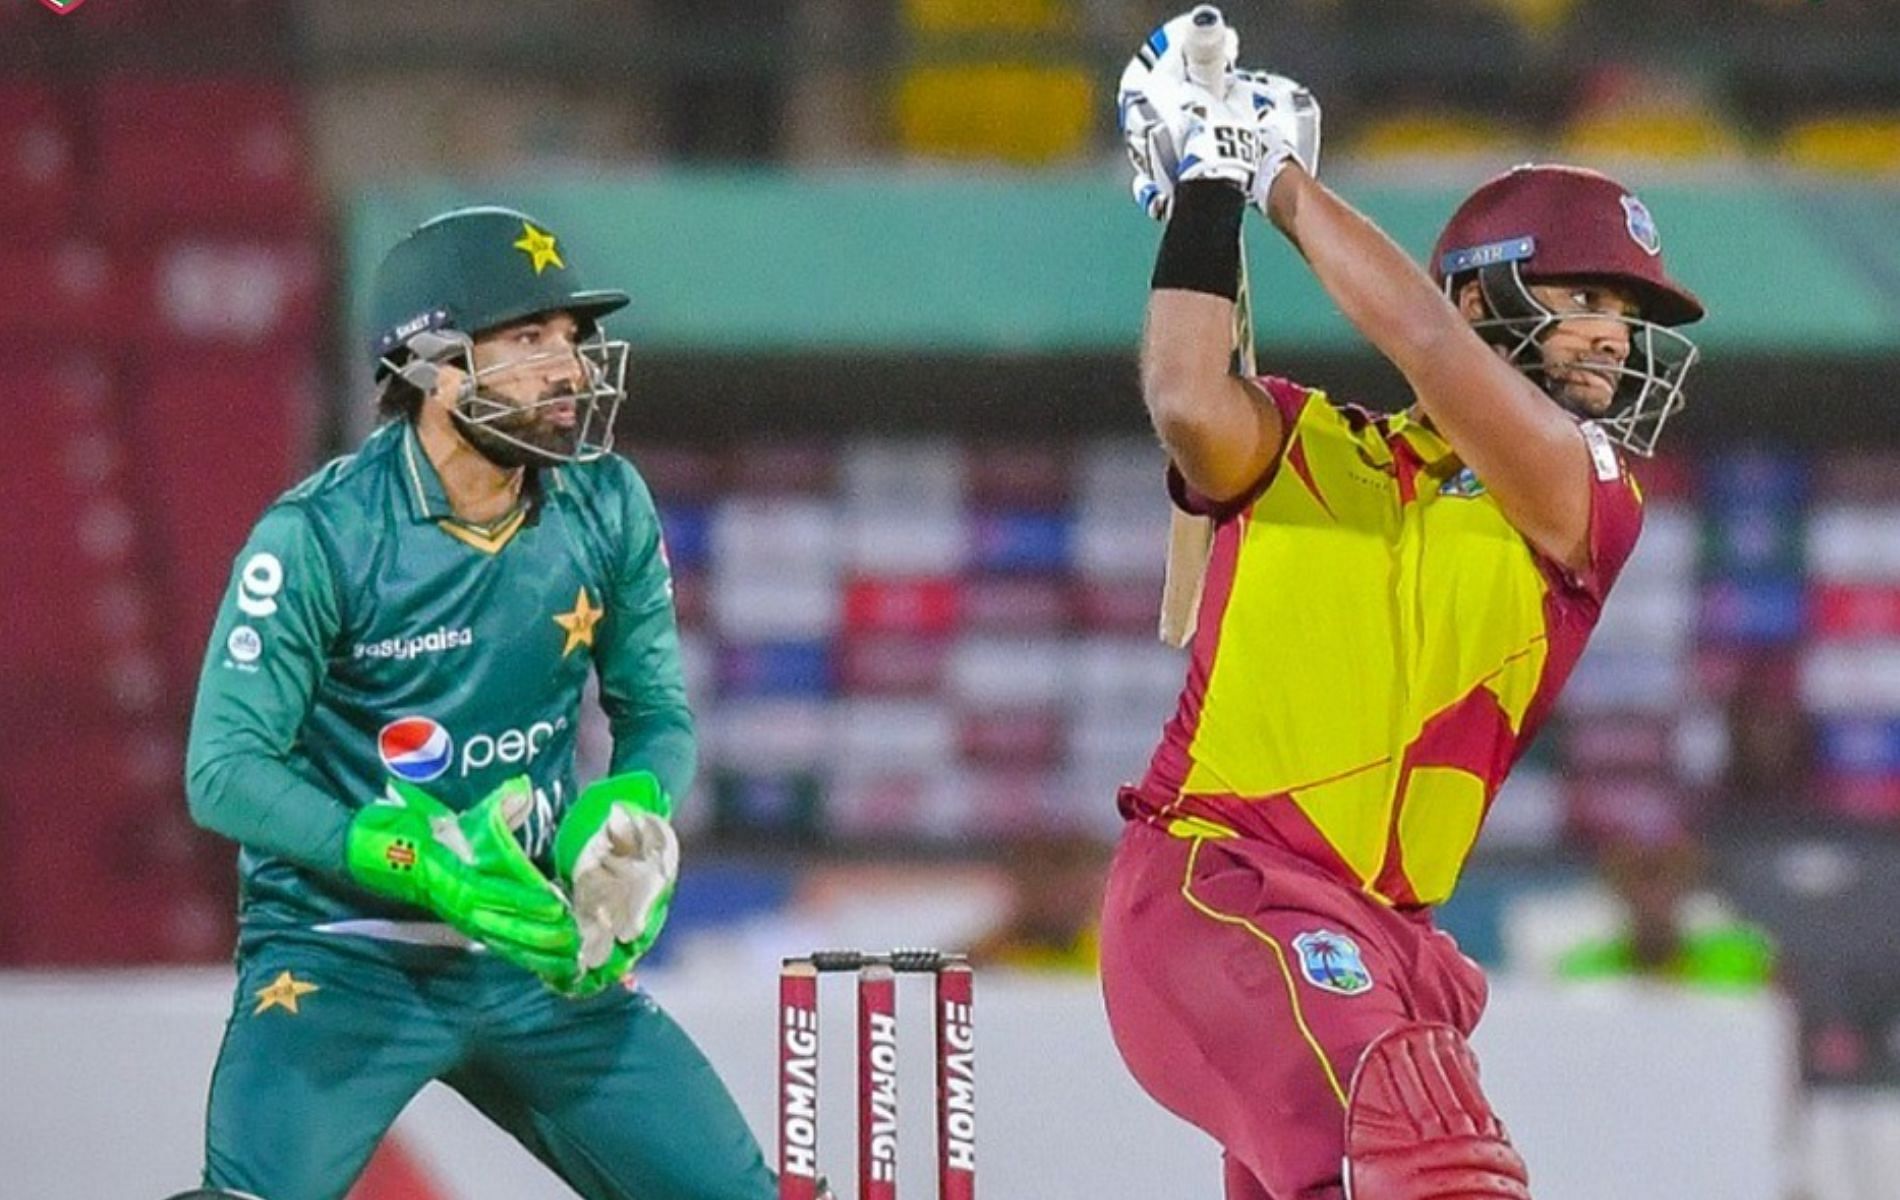 The three-match ODI series between Pakistan and West Indies has been rescheduled (PC: PCB).